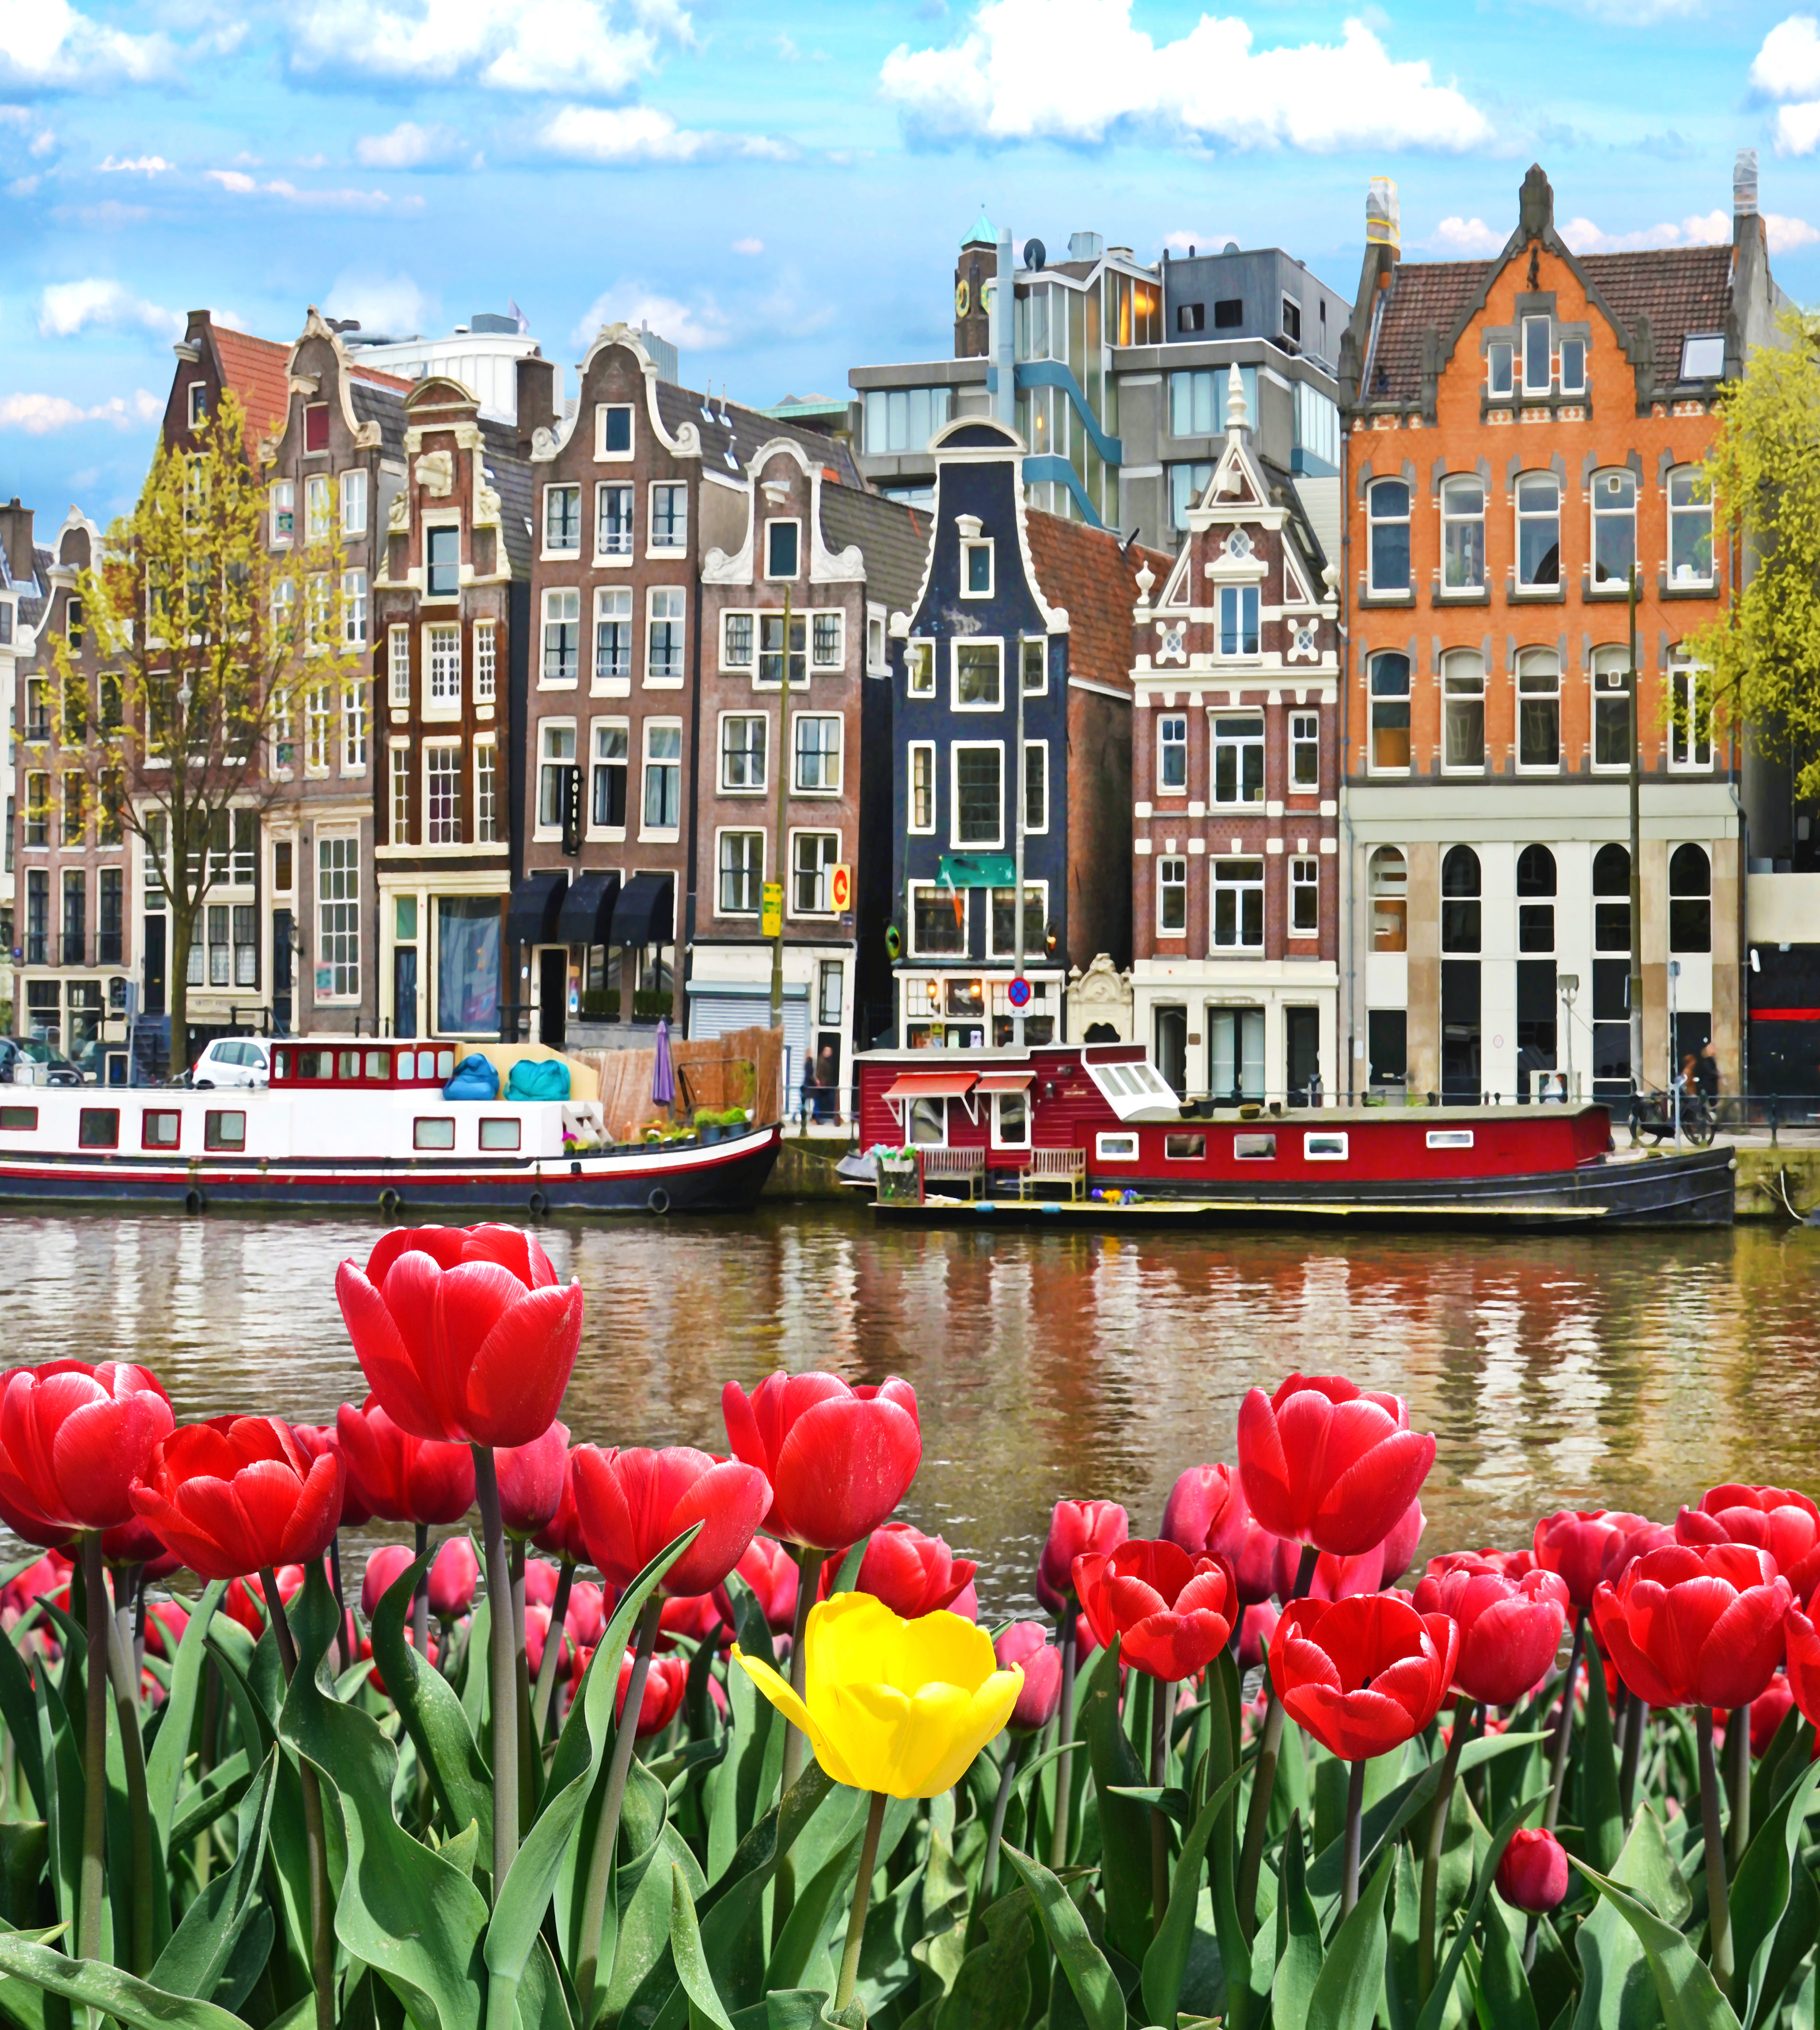 The aim of AI is to improve the quality of life in Amsterdam